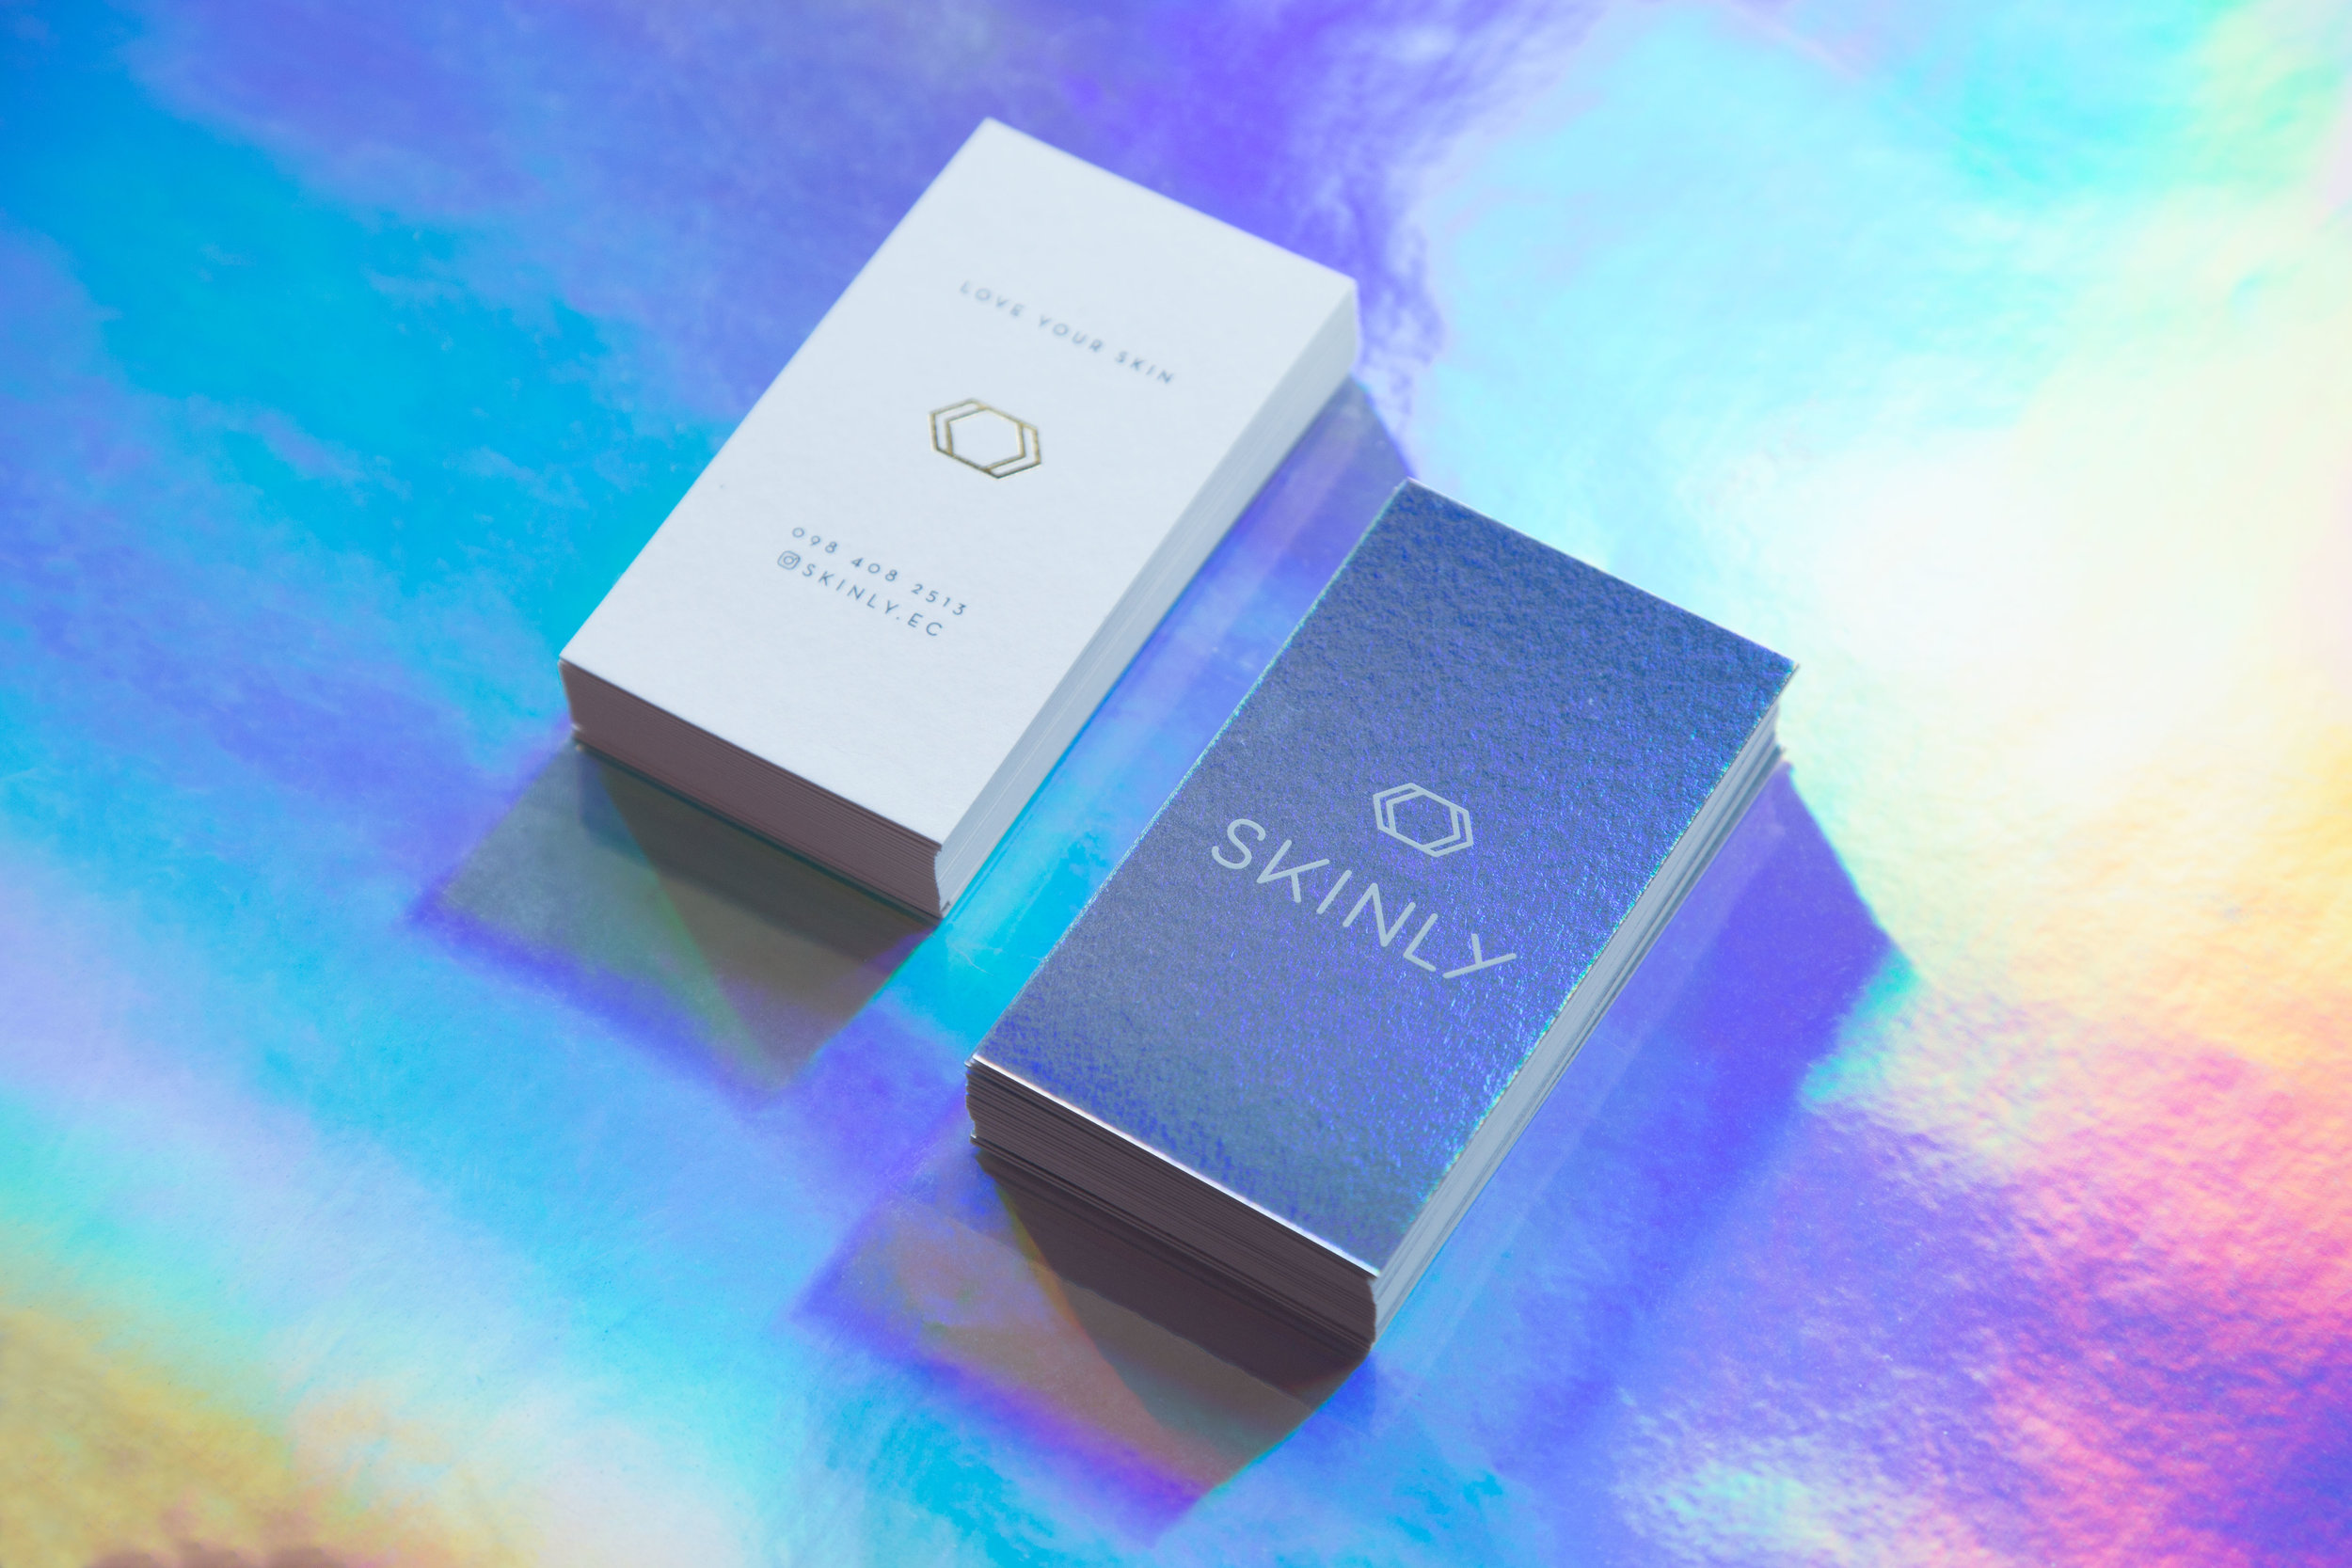 Modern Holographic Brand Identity and Packaging for Organica Skin Care Products from Ecuador